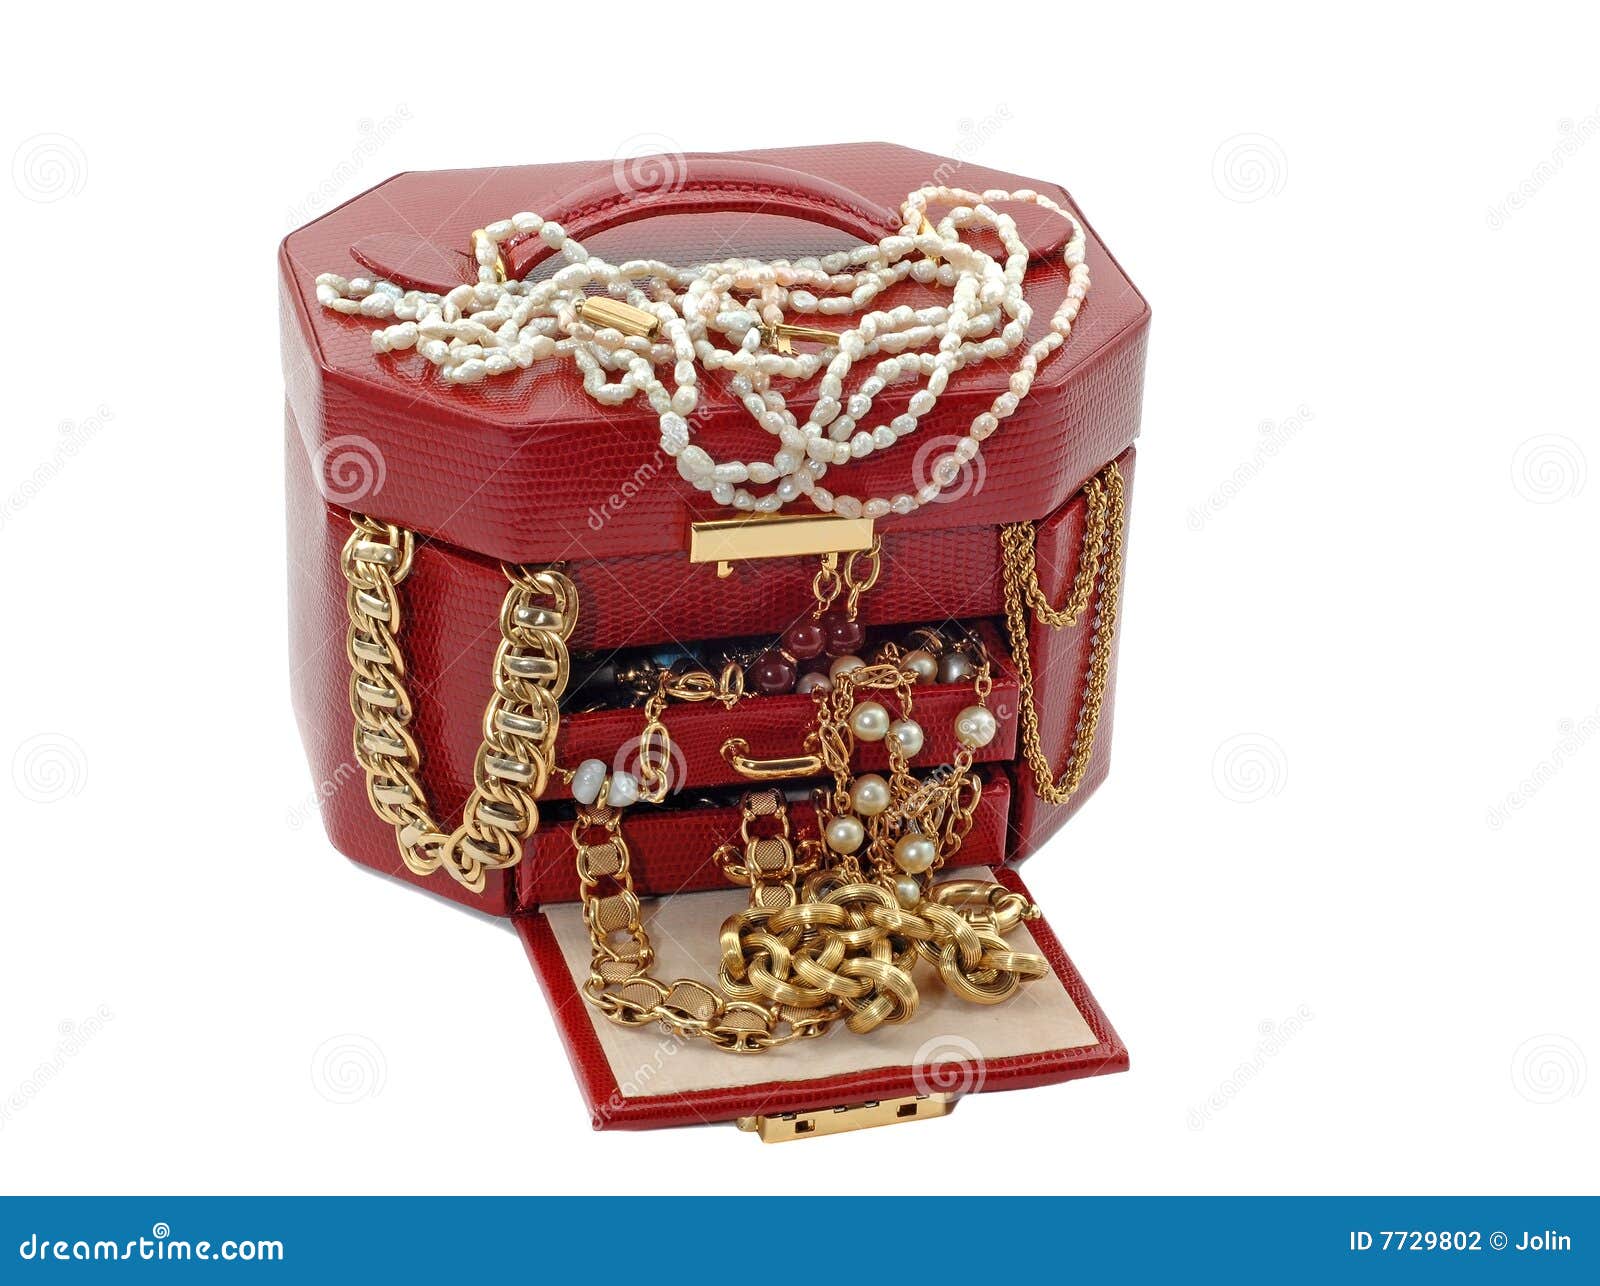 box of treasure with gold jewelry